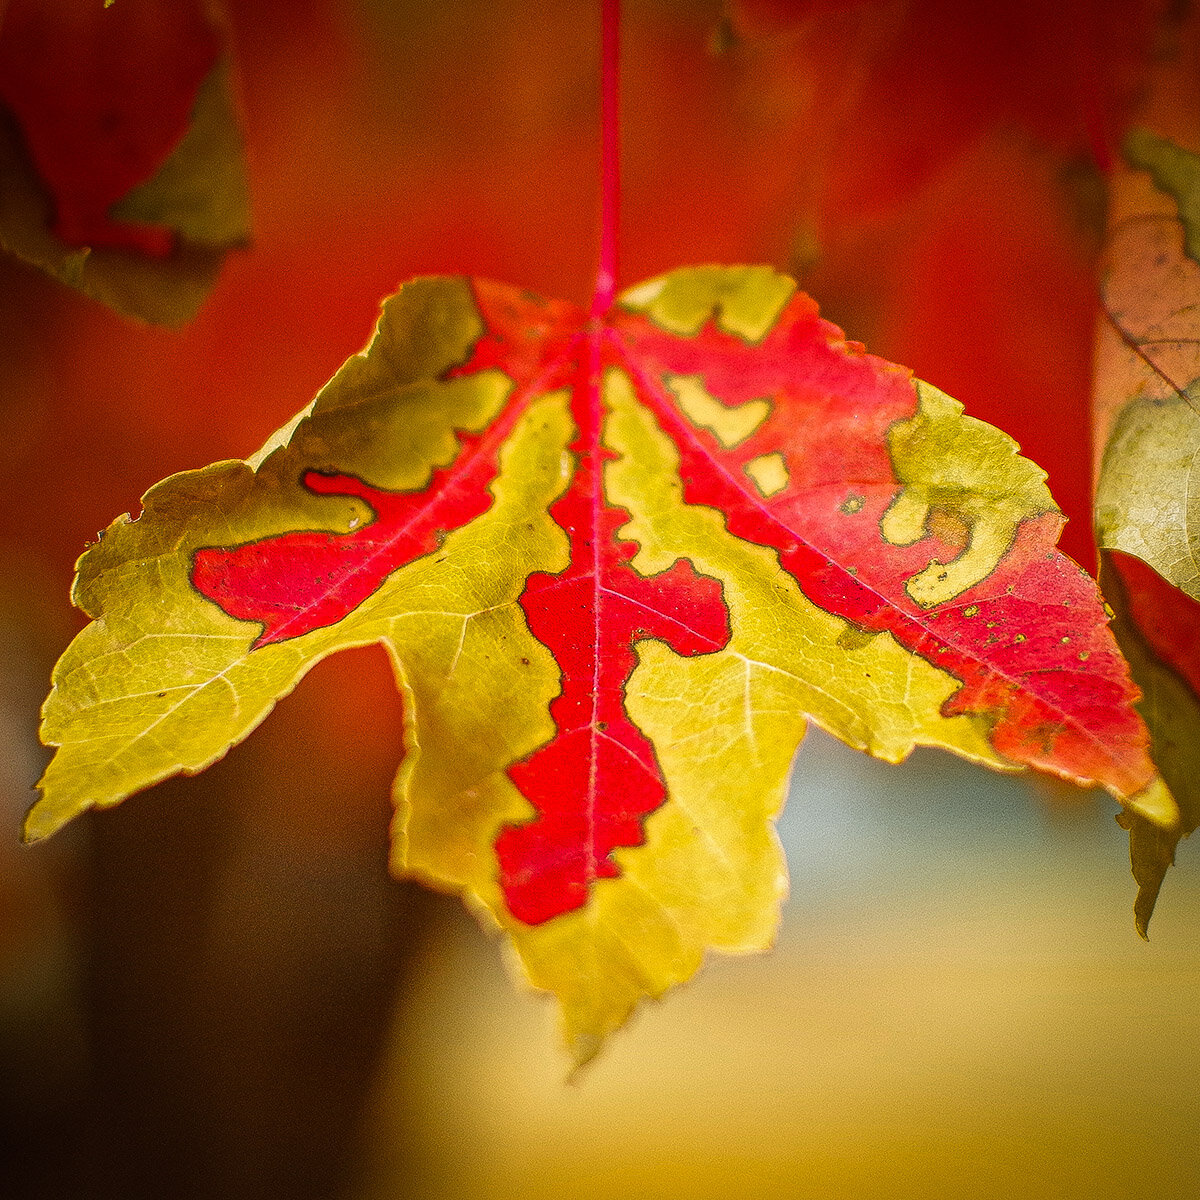 11-24-19 Chattanooga_142 Fall leaves colors best_edit square IG_1200 px.jpg